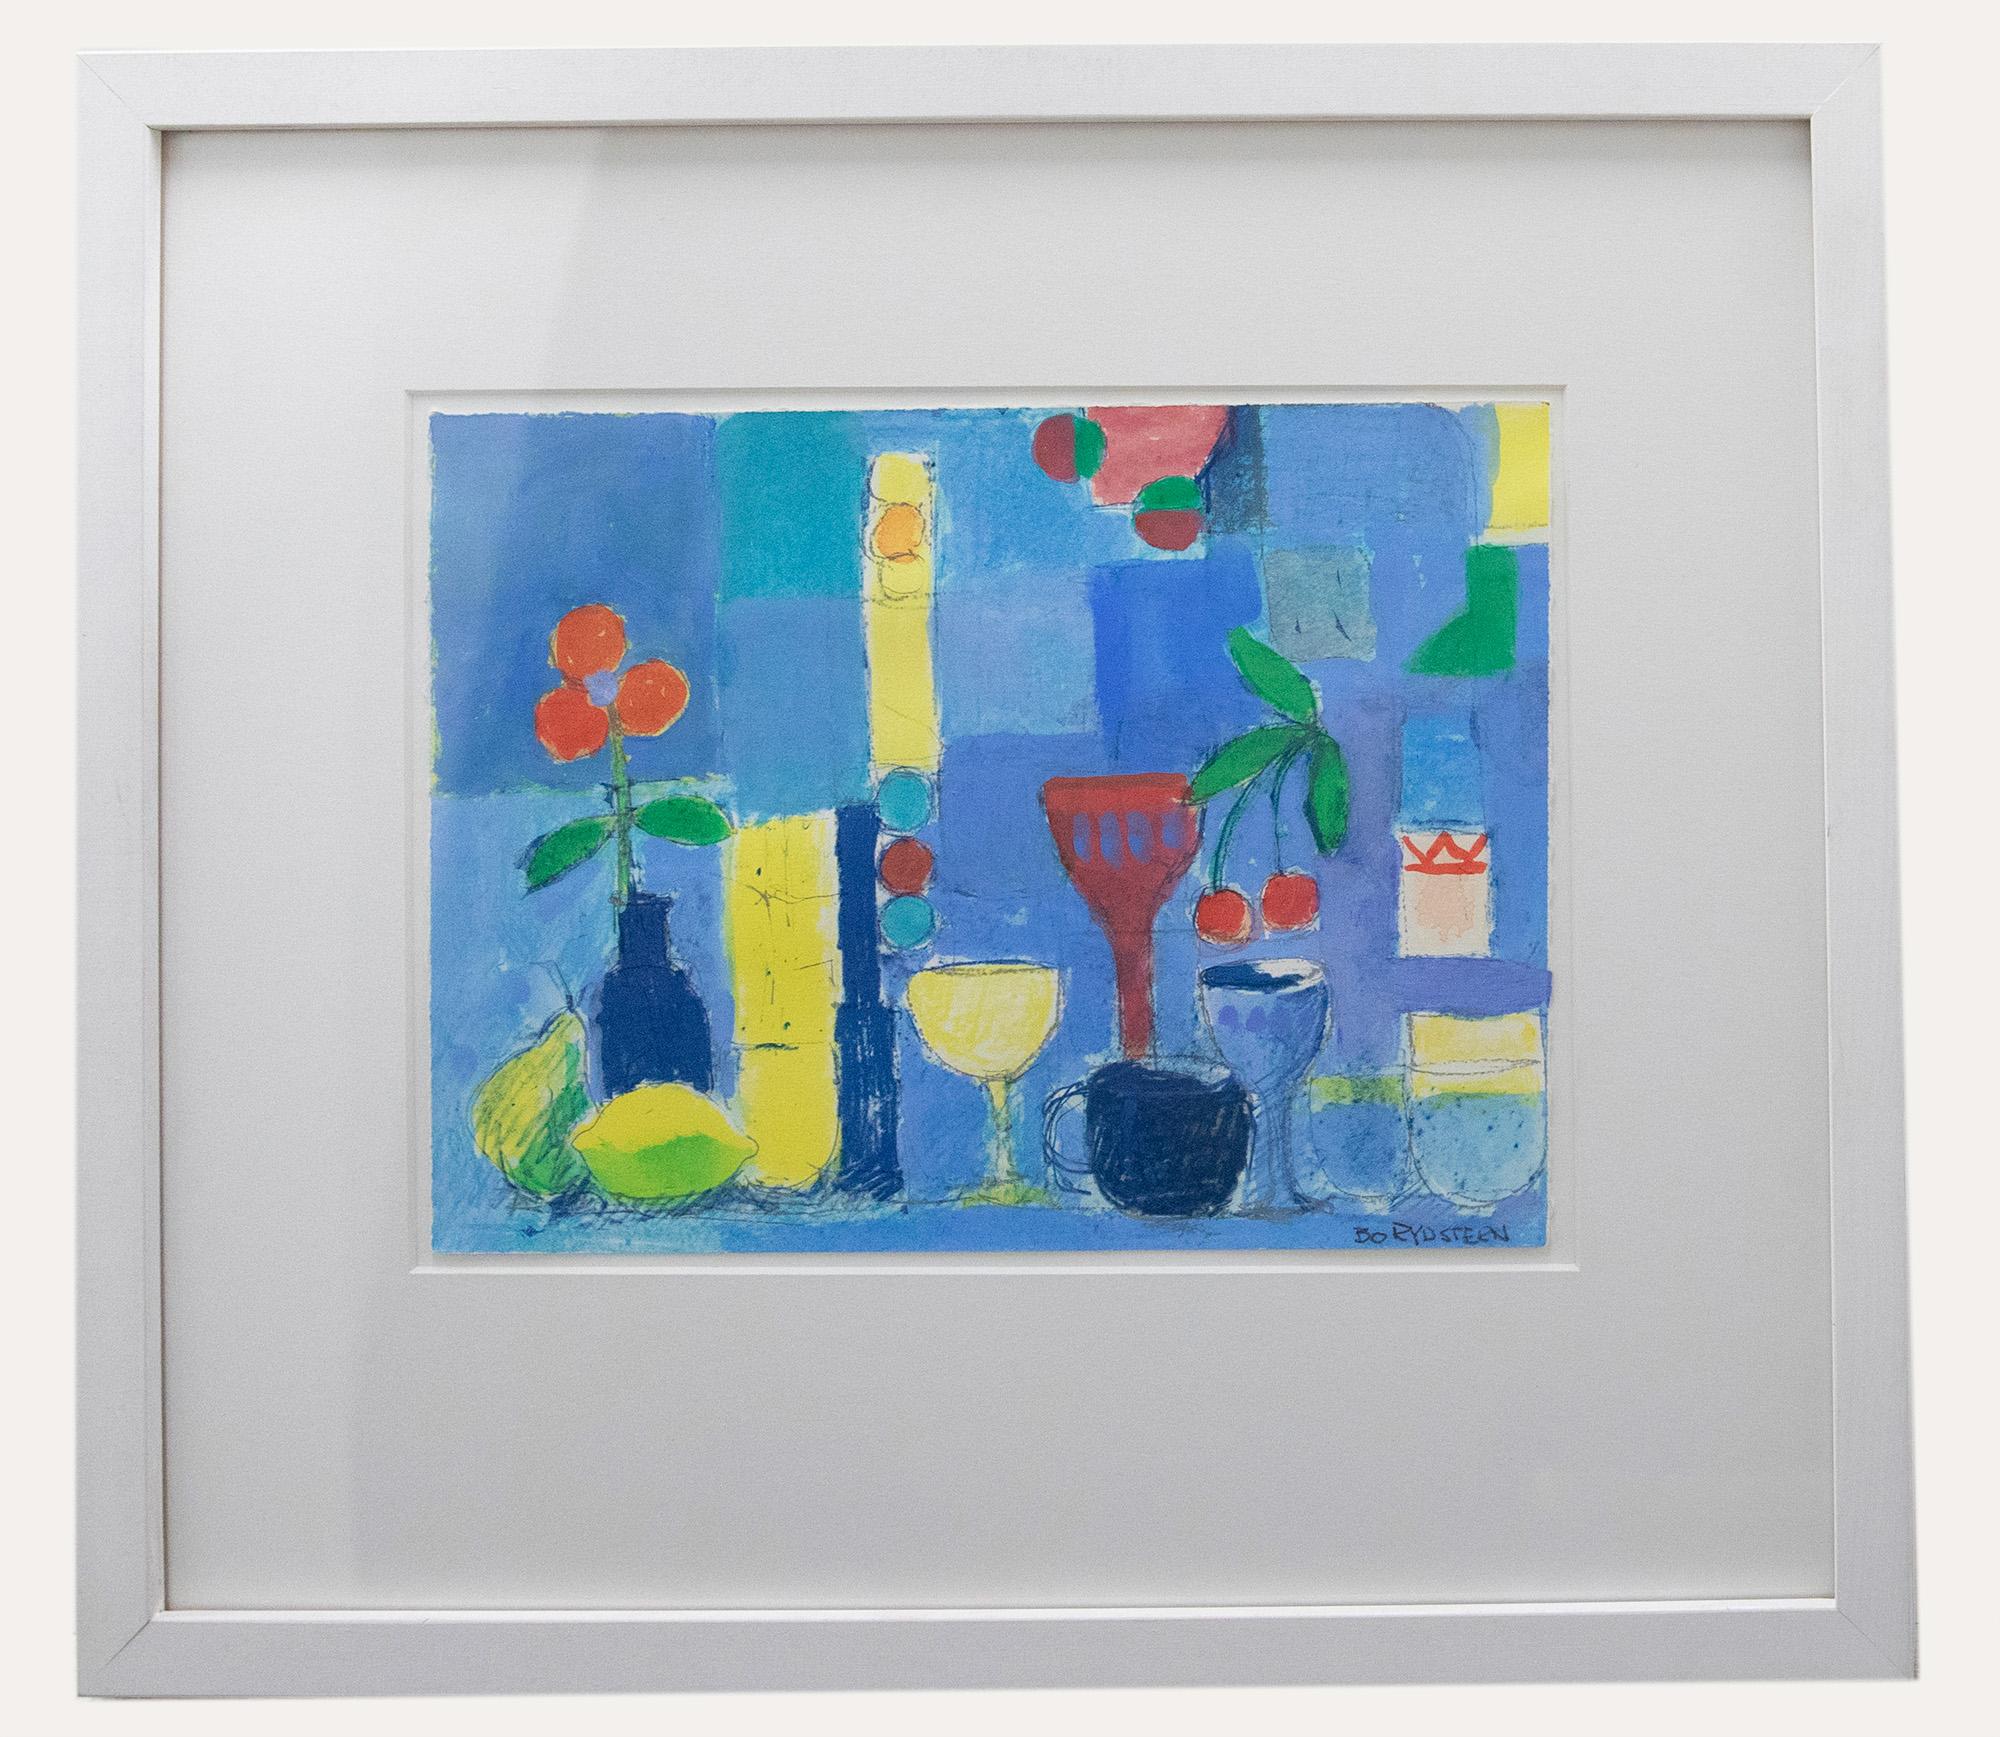 Bo Rydstern - Framed Contemporary Mixed Media, Still Life with Fruit & Vessels - Mixed Media Art by Unknown